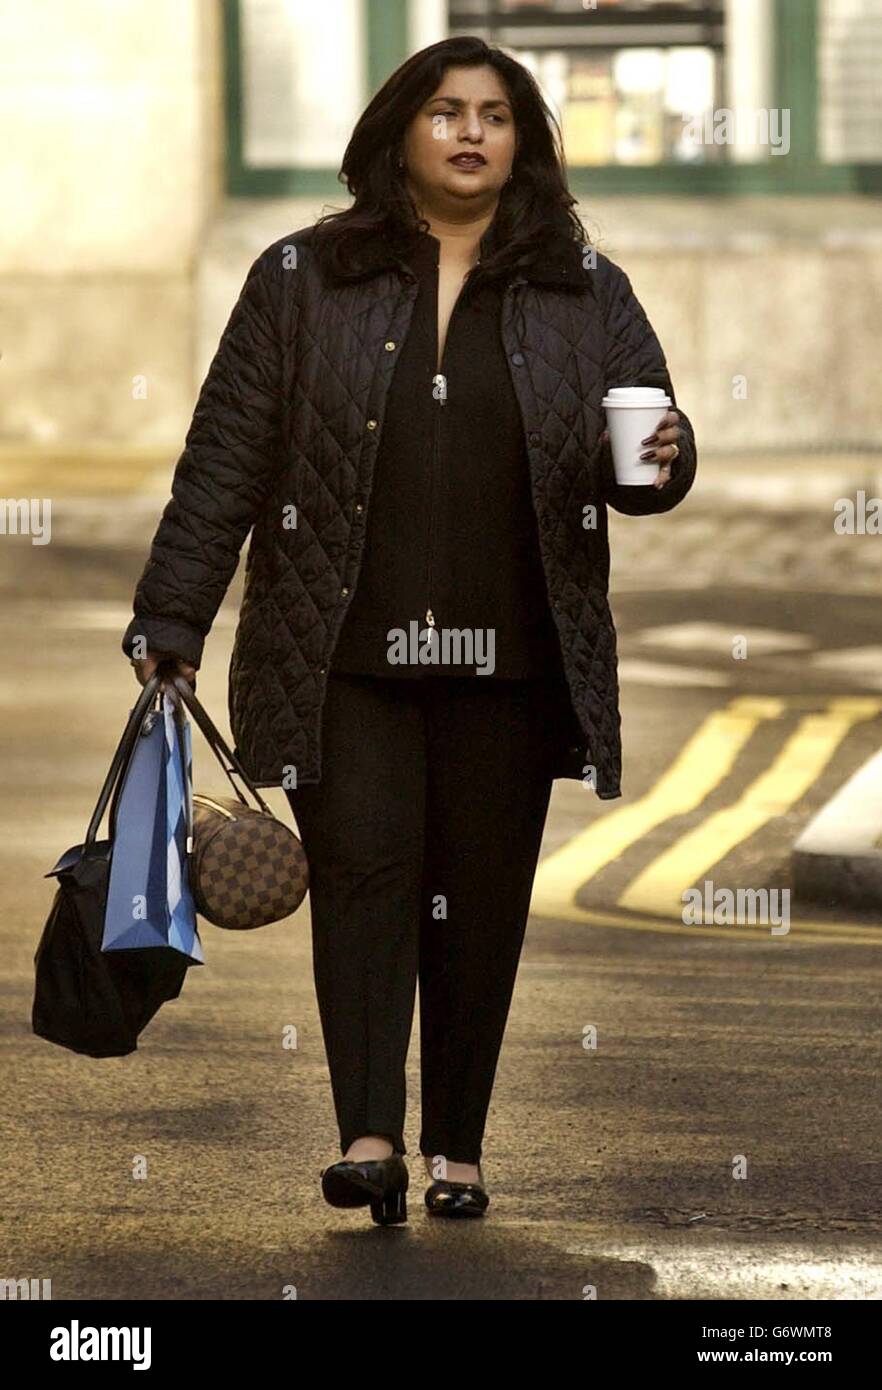 Joyti De-Laurey, who is accused of fleecing a 4.5 million fortune from her bosses, arrives at Southwark Crown Court in Central London as the jury continues to consider its verdict. The six-man, six-woman panel has heard that city secretary De-Laurey, 35, used her allegedly ill-gotten gains for "astonishing" spending sprees on jewellery, designer clothes, fast cars and properties in this country and abroad. Stock Photo